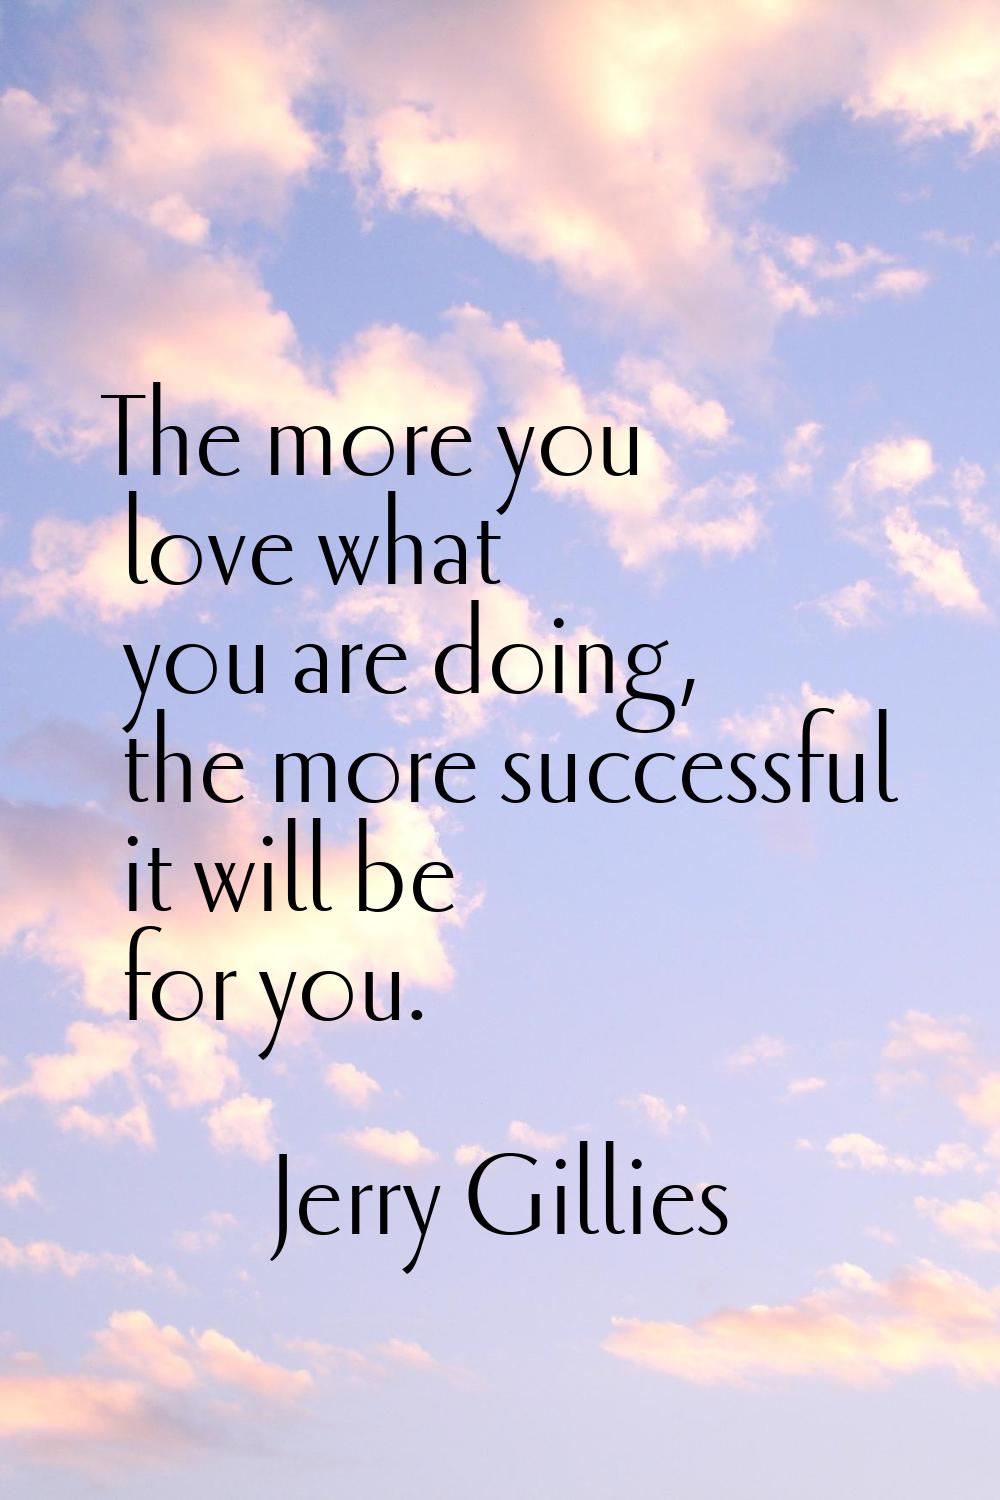 The more you love what you are doing, the more successful it will be for you.